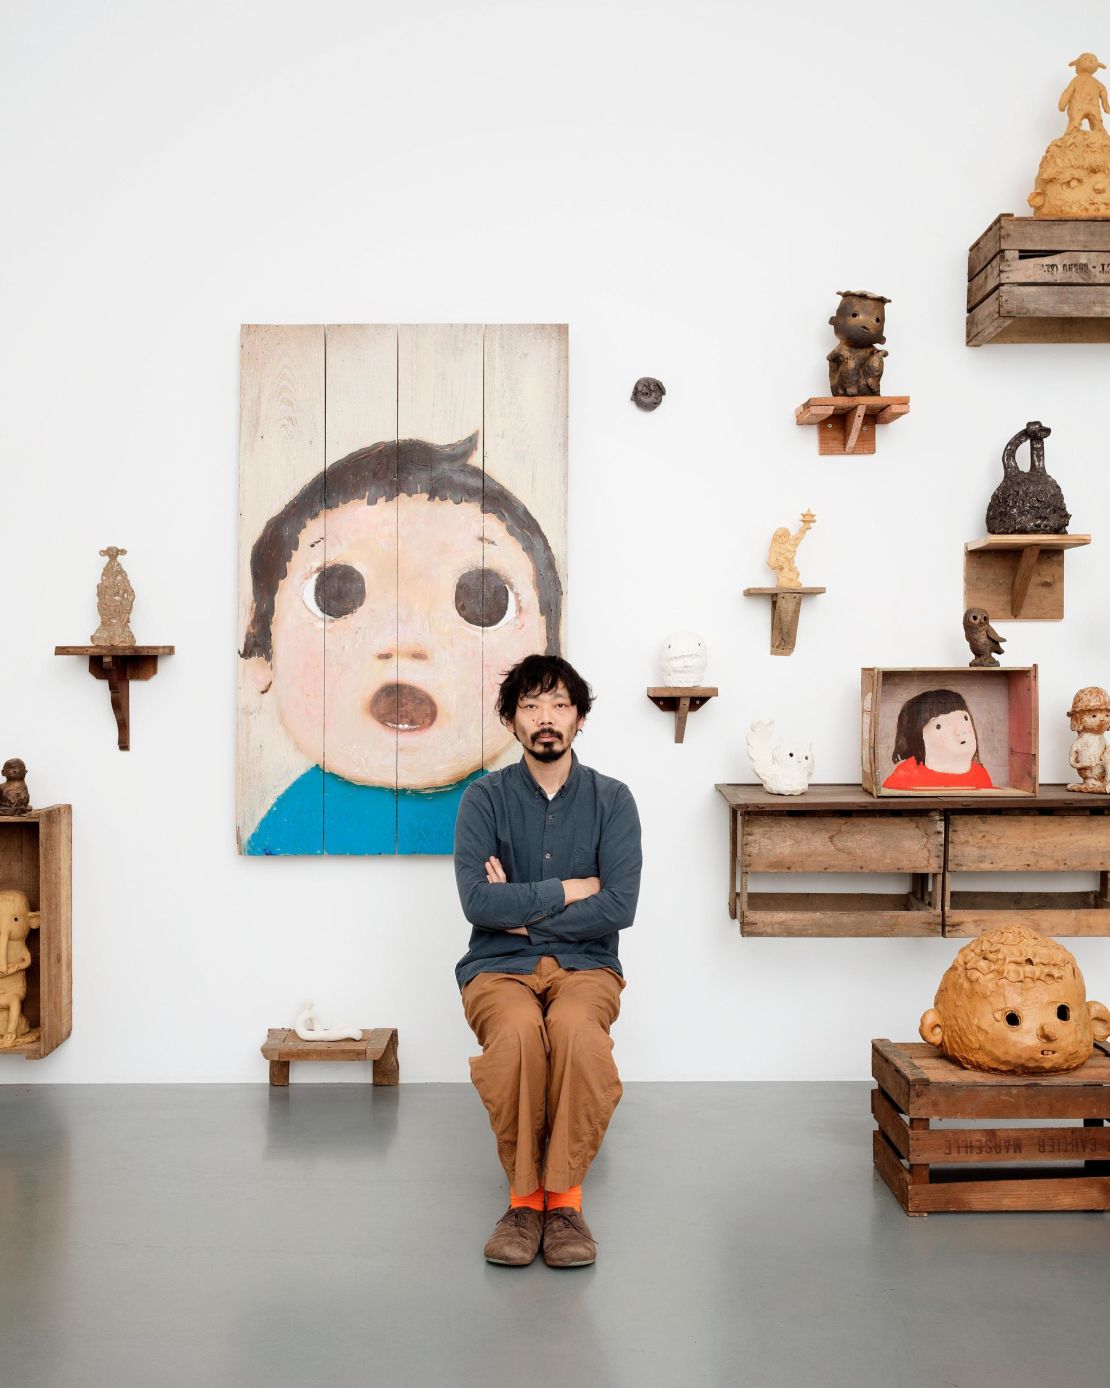 Otani with a selection of his sculptures, paintings and ceramic artworks.